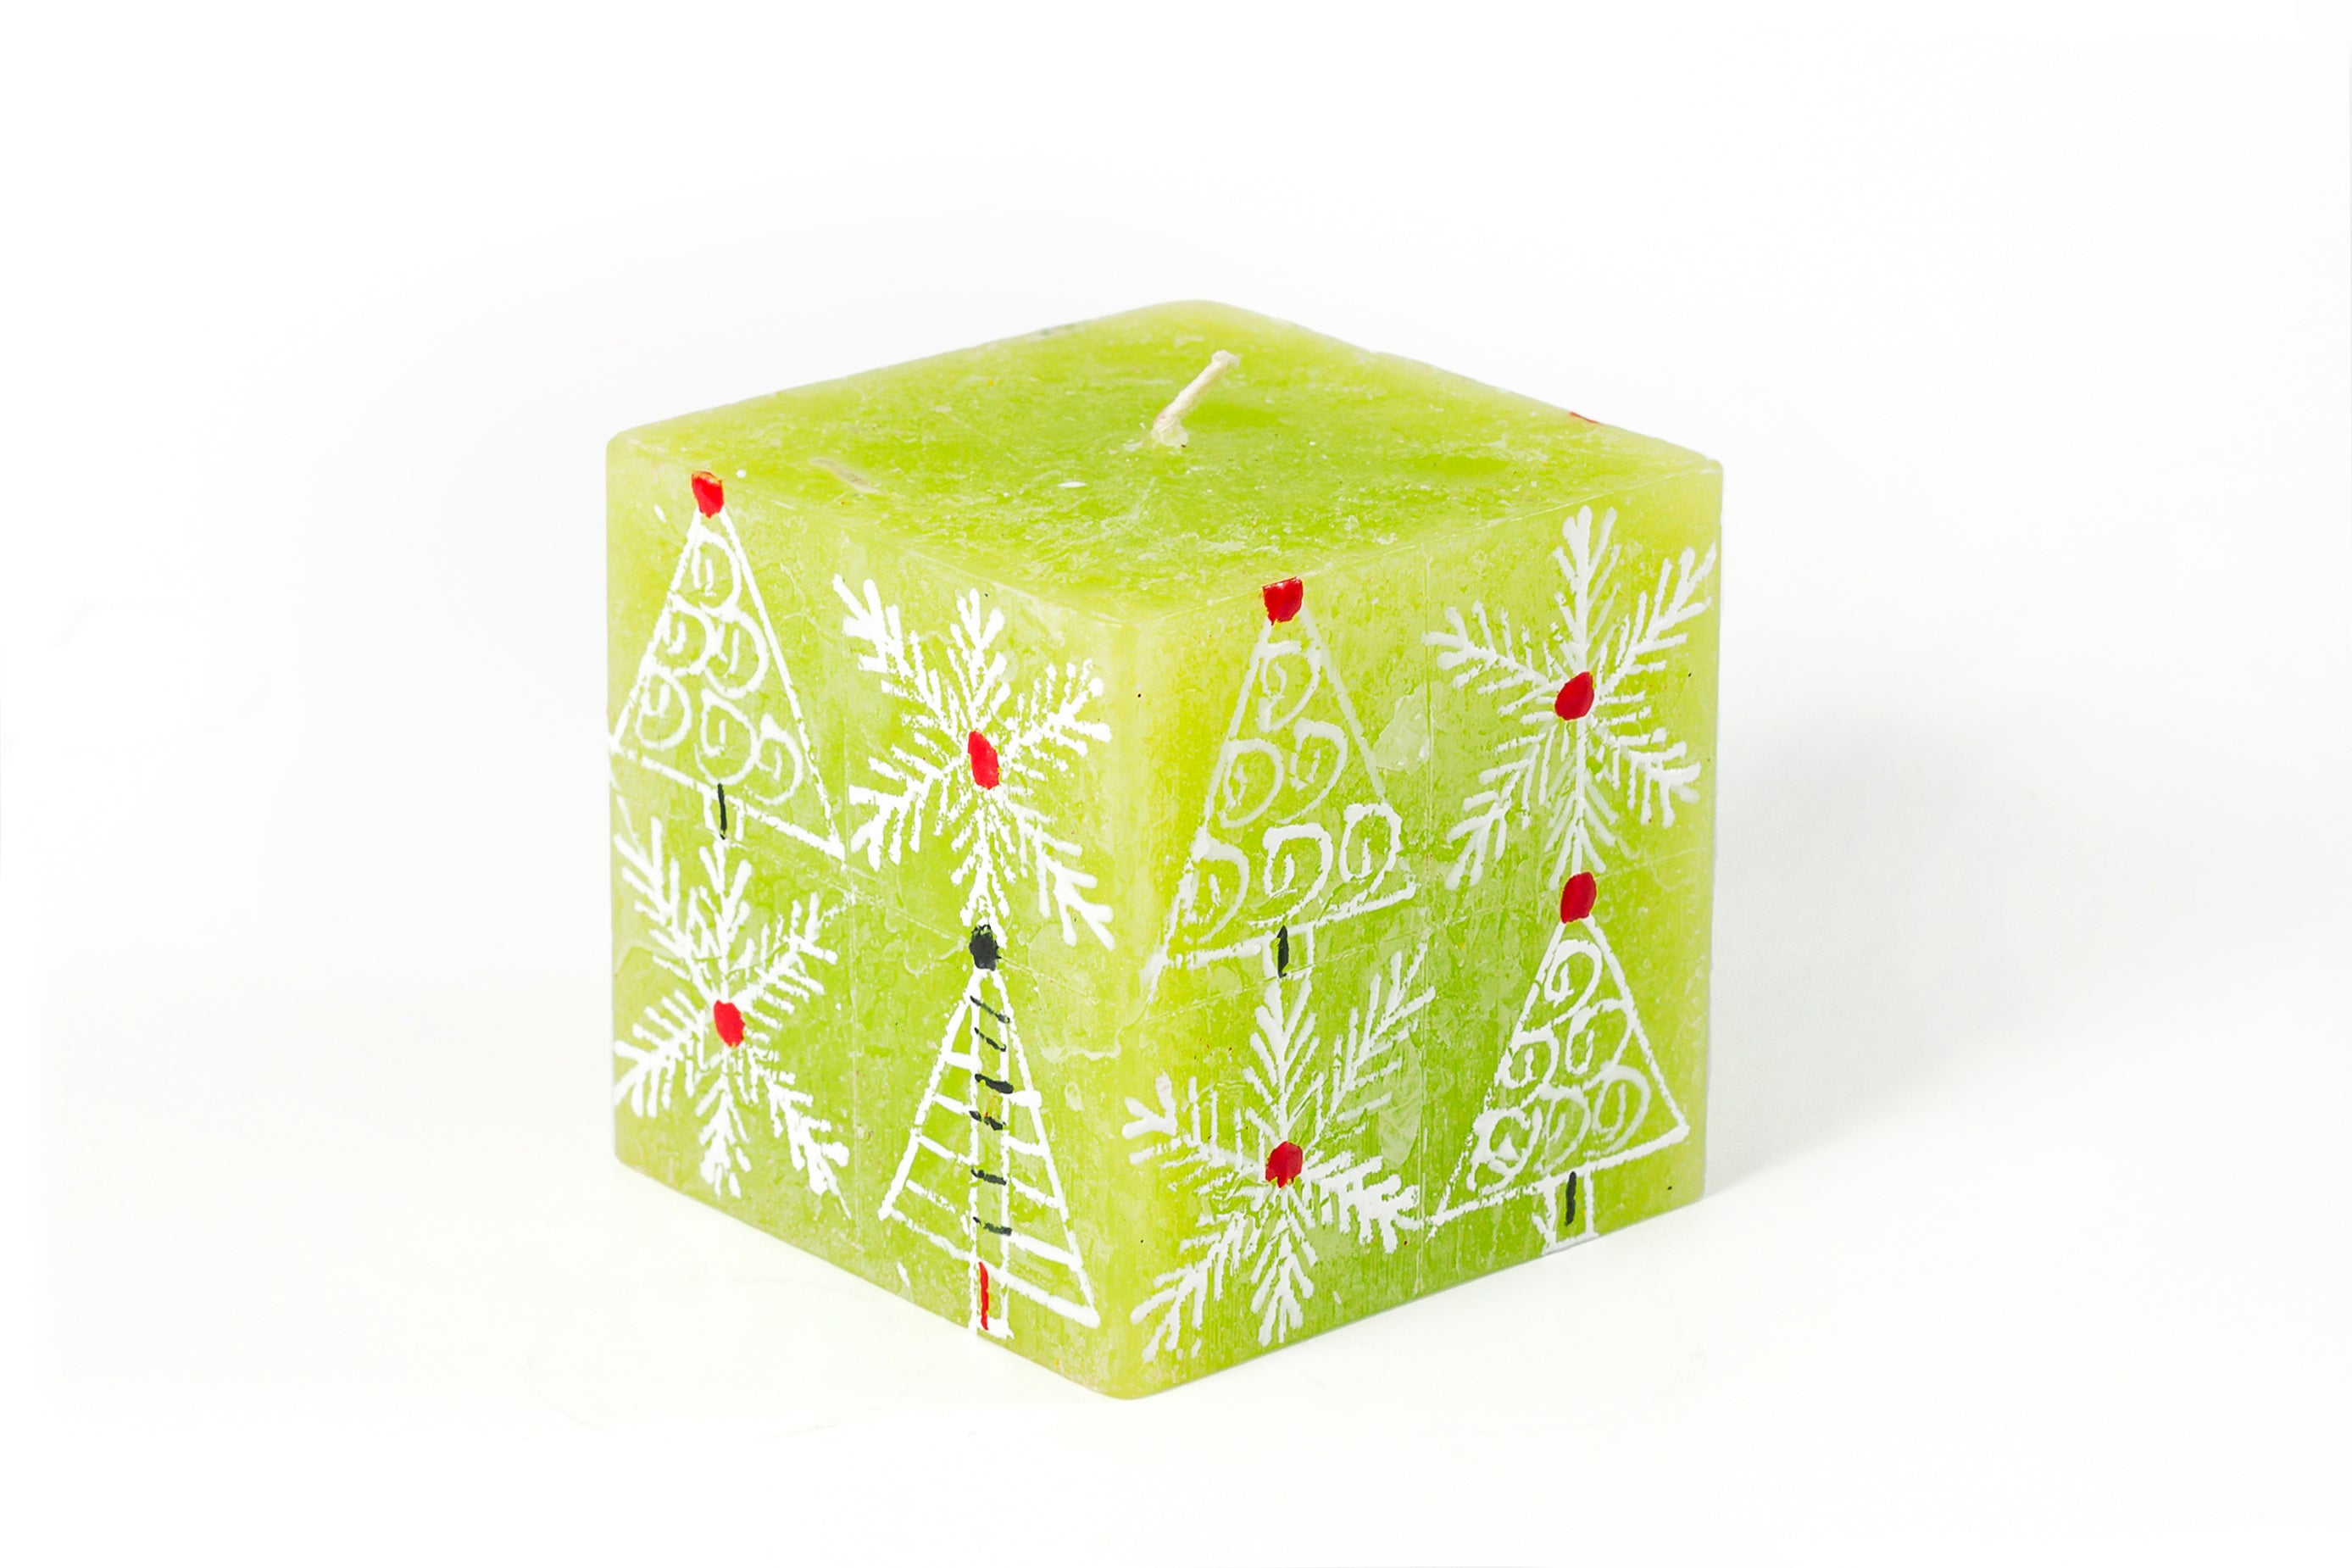 Whimsy Christmas 3" x 3" x 3" Cube Candle. This one has a green base color and hand painted with trees, snow flakes and Christmas ornaments in white with red, green highlights.